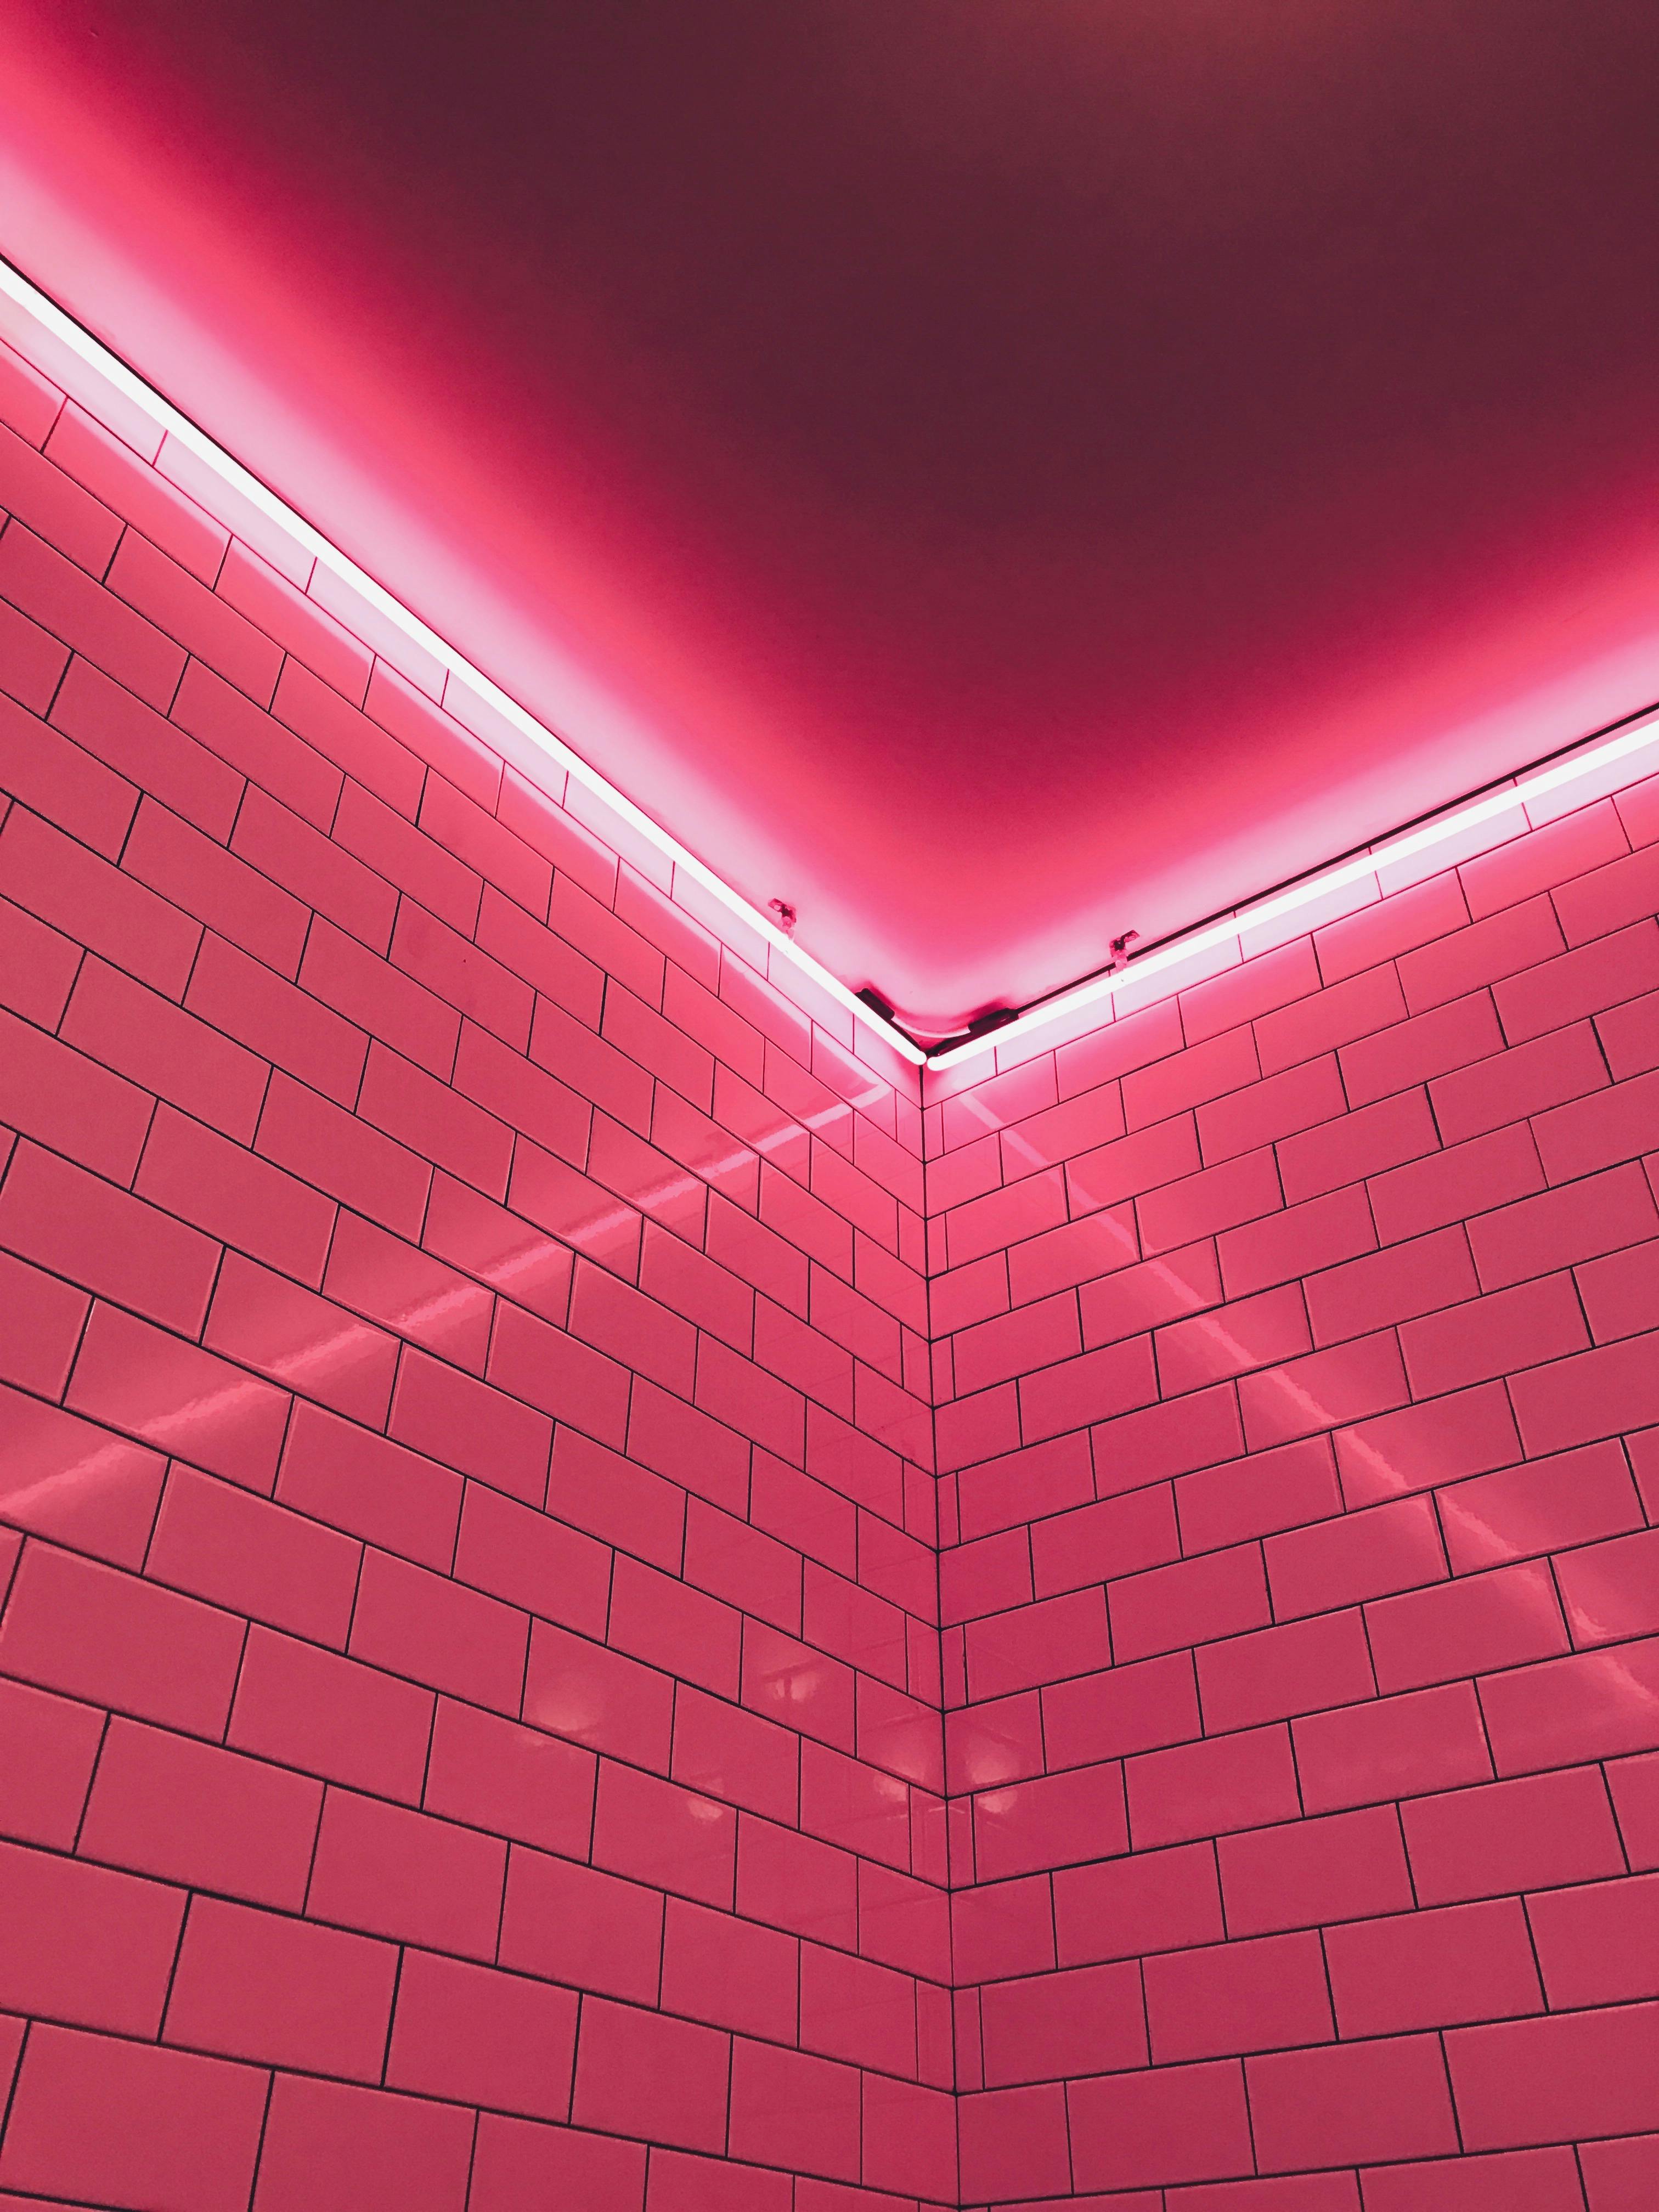 Cool Pink Backgrounds  Wallpaper Cave